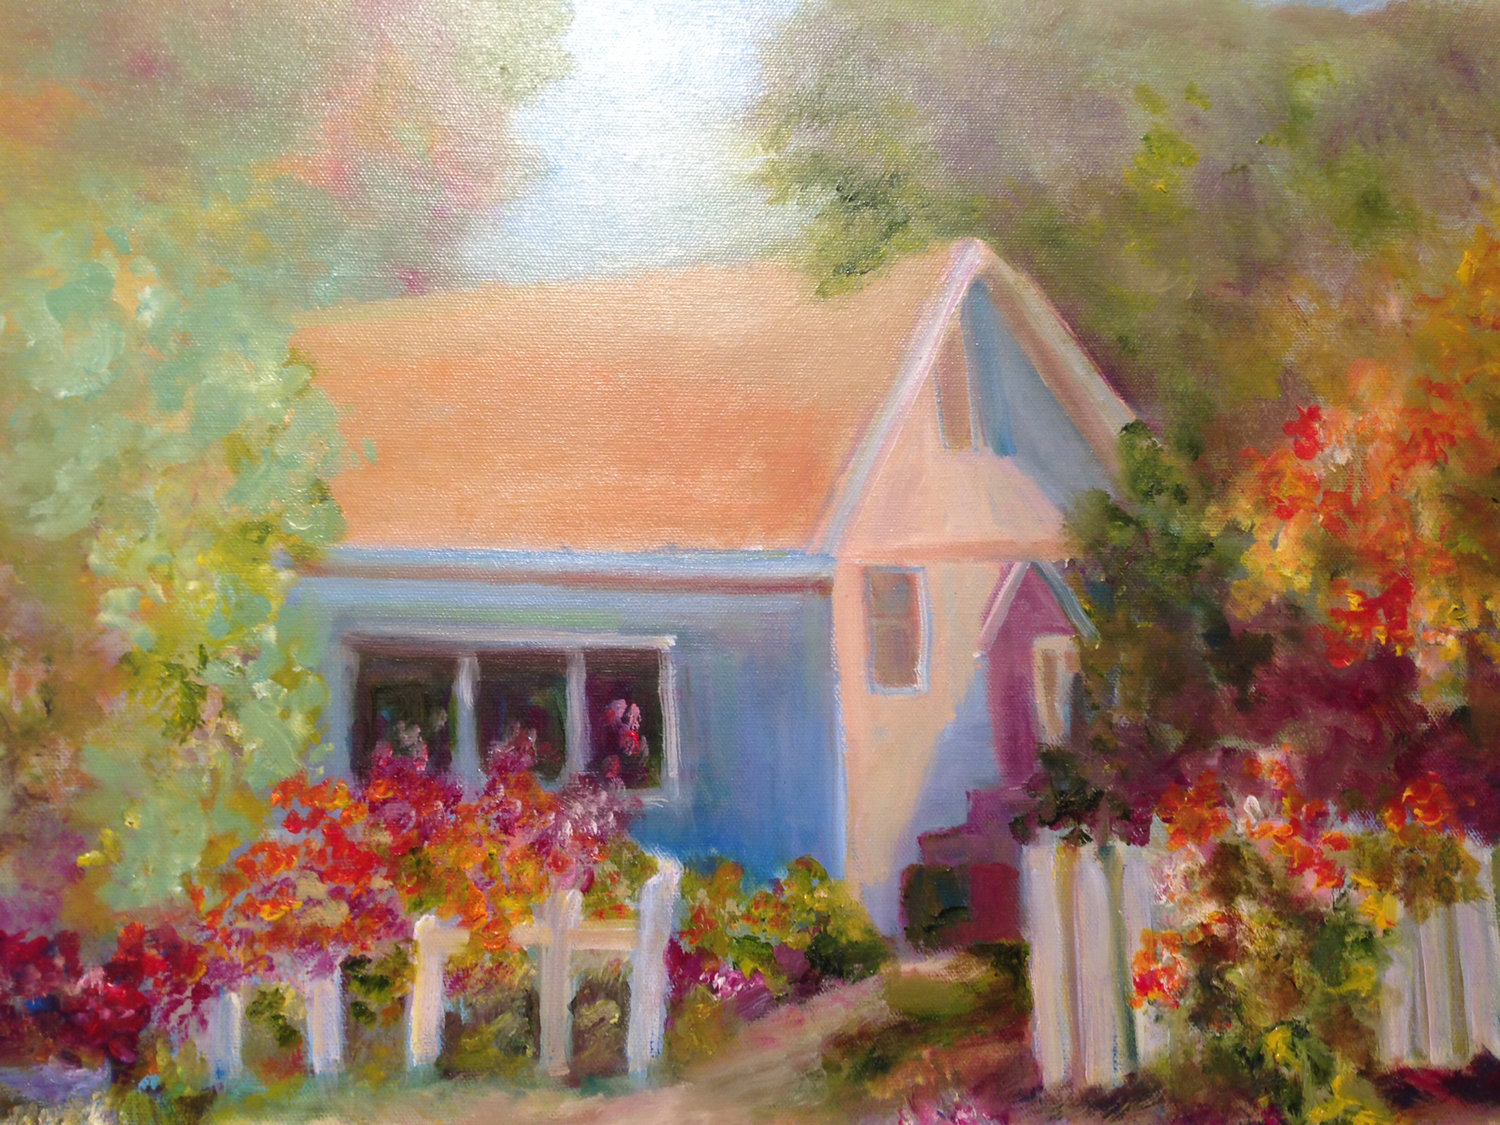 Madeline Tully's "Summer Cottage" is reminiscent of the Old Masters, with a soft, old-world charm.